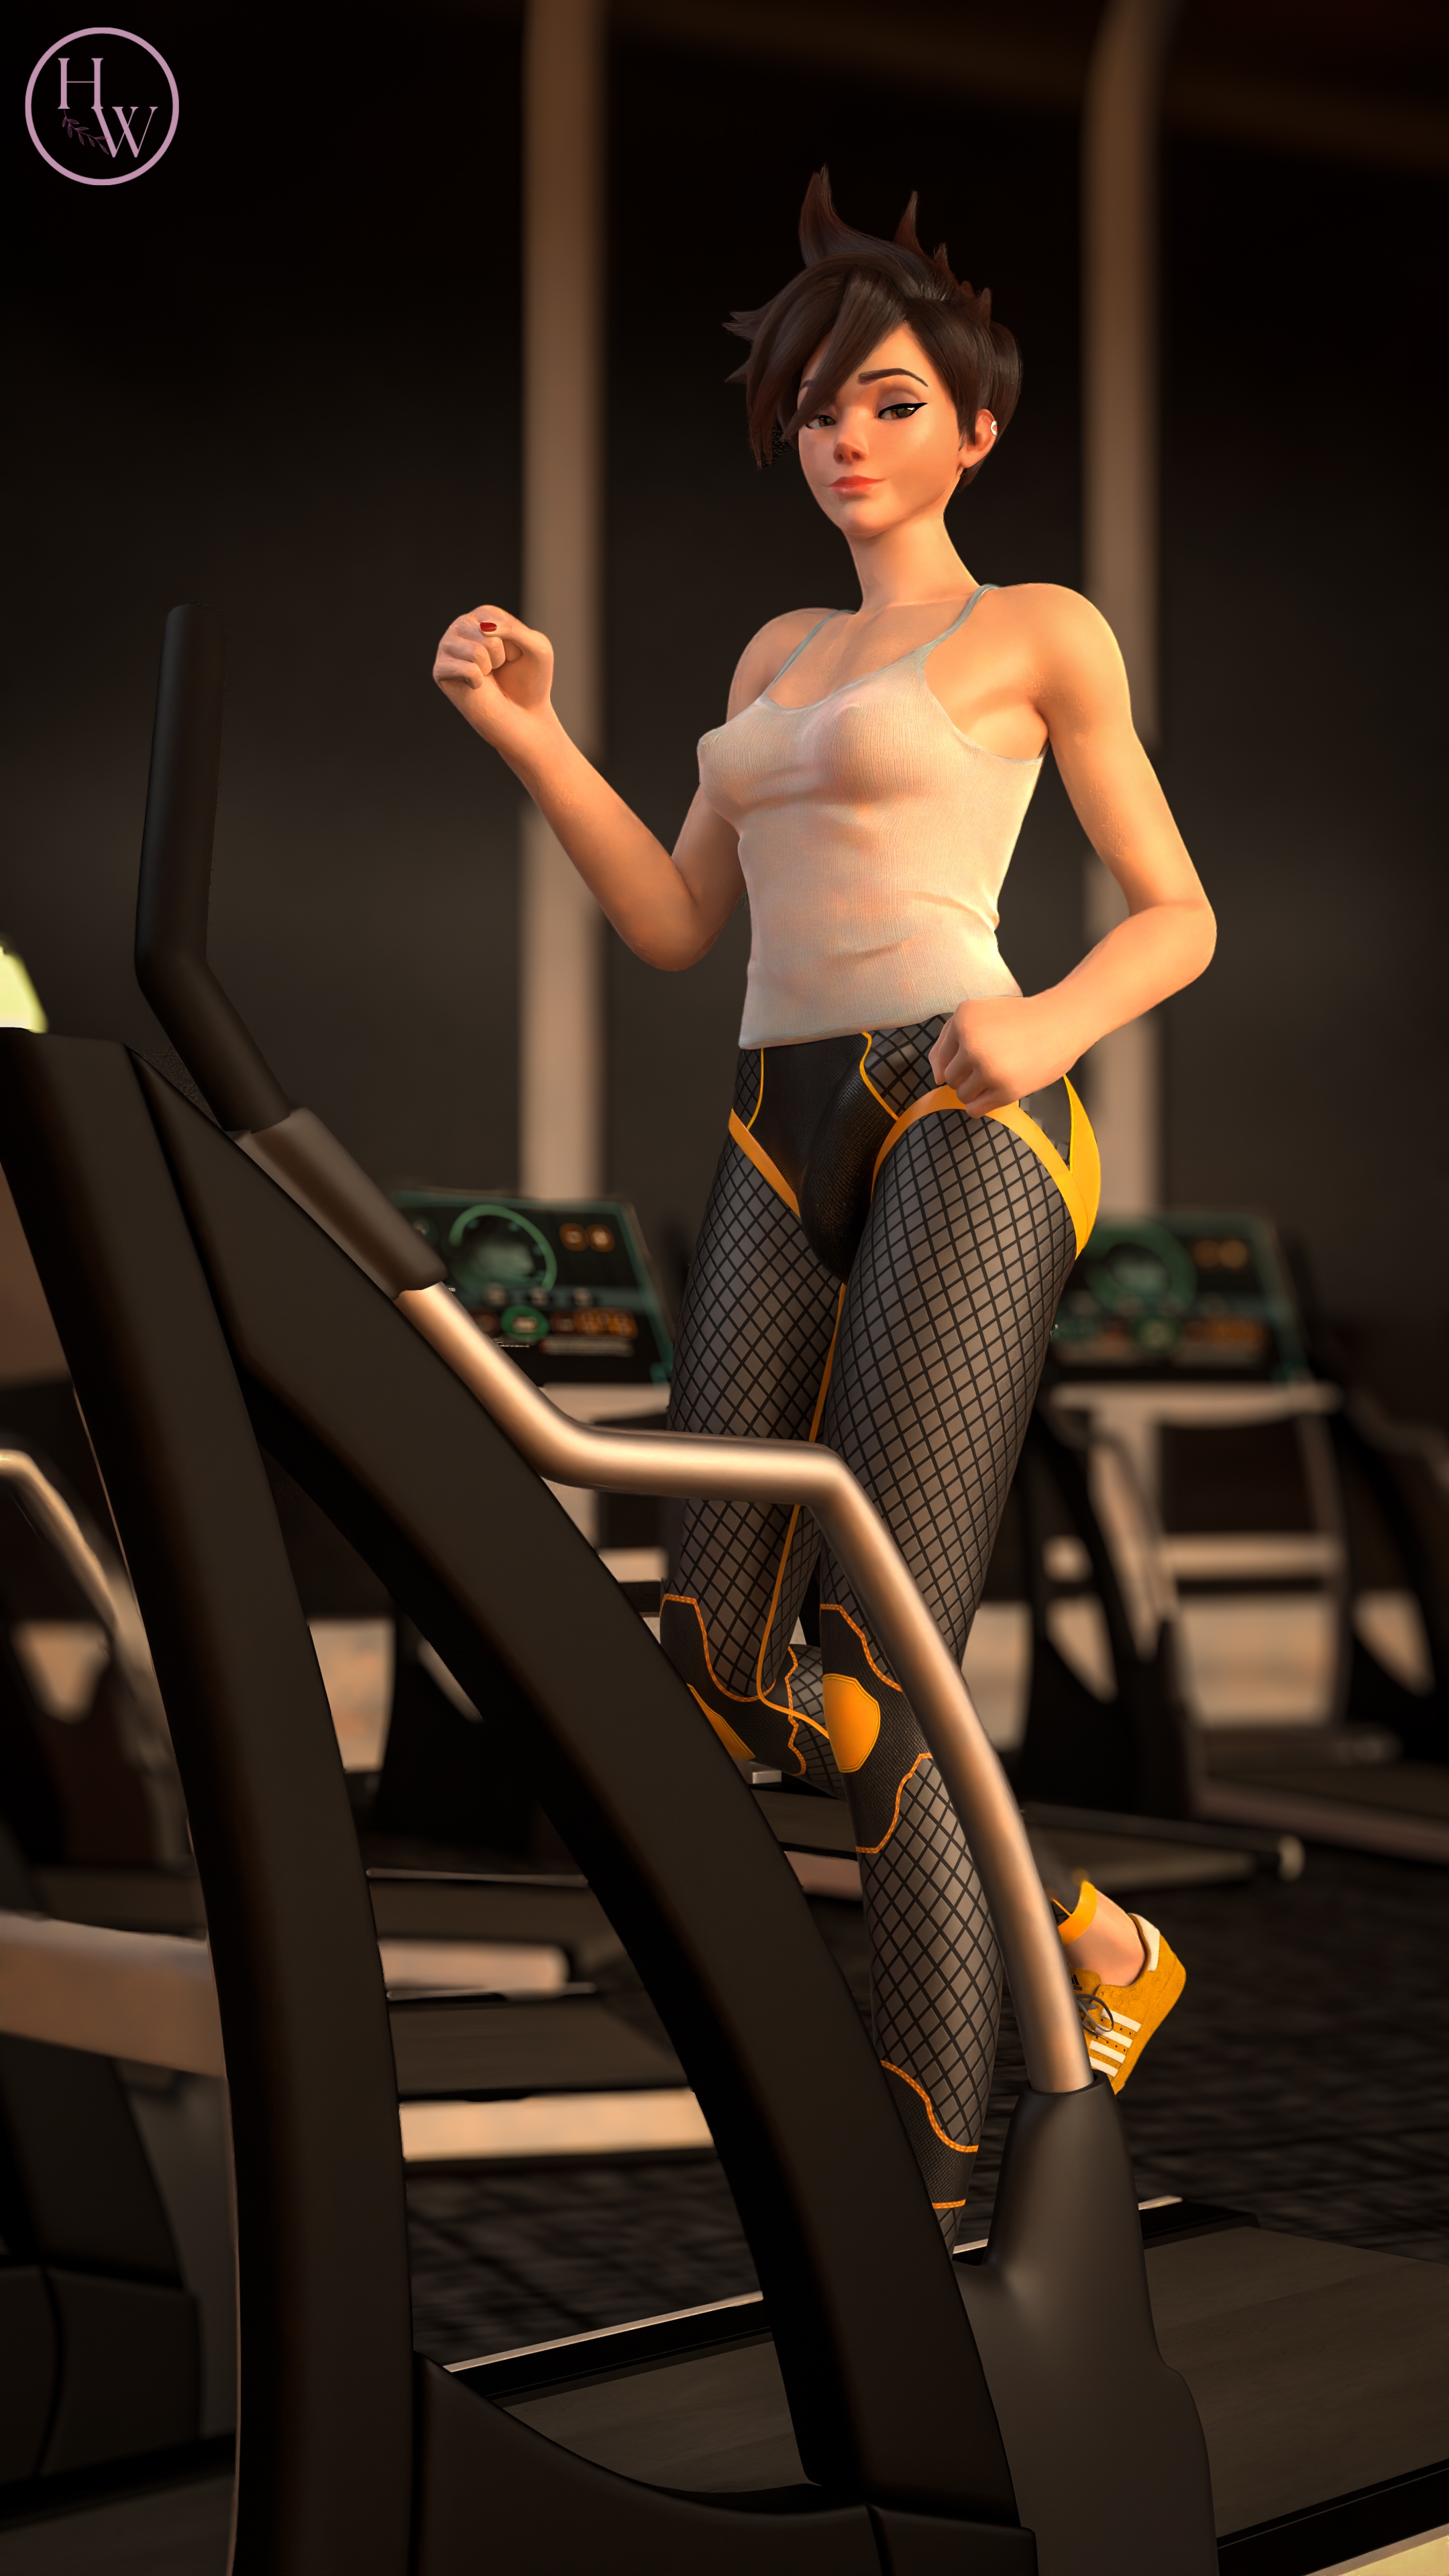 Tracer workout Tracer Overwatch  2